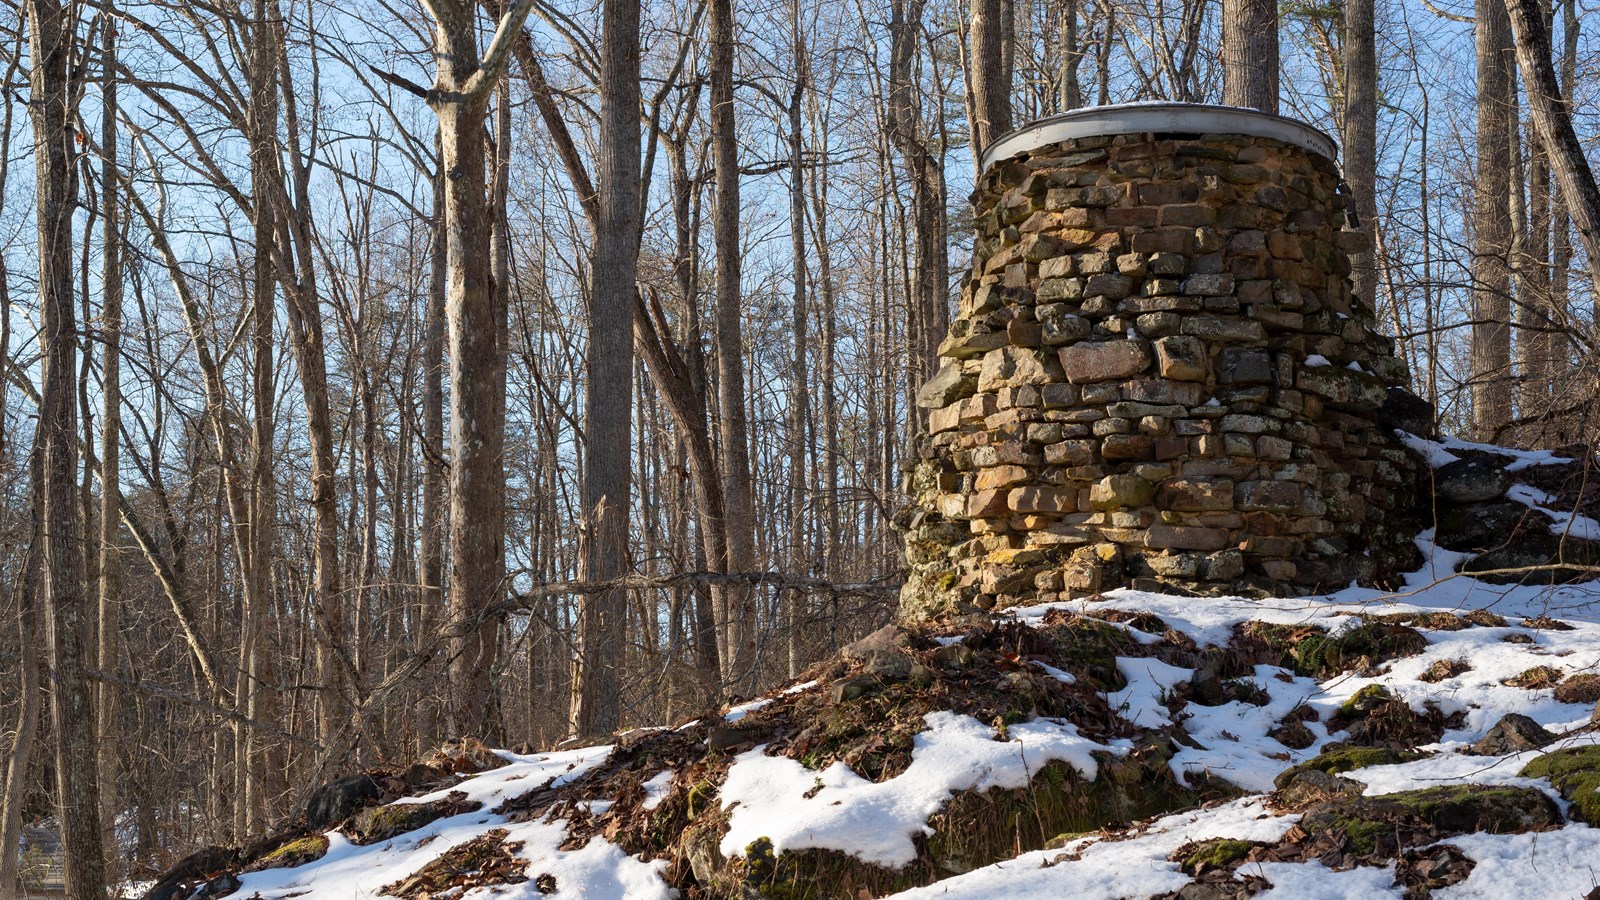 Ruins of a furnace stack, a conical, stone structure, 20 feet high.